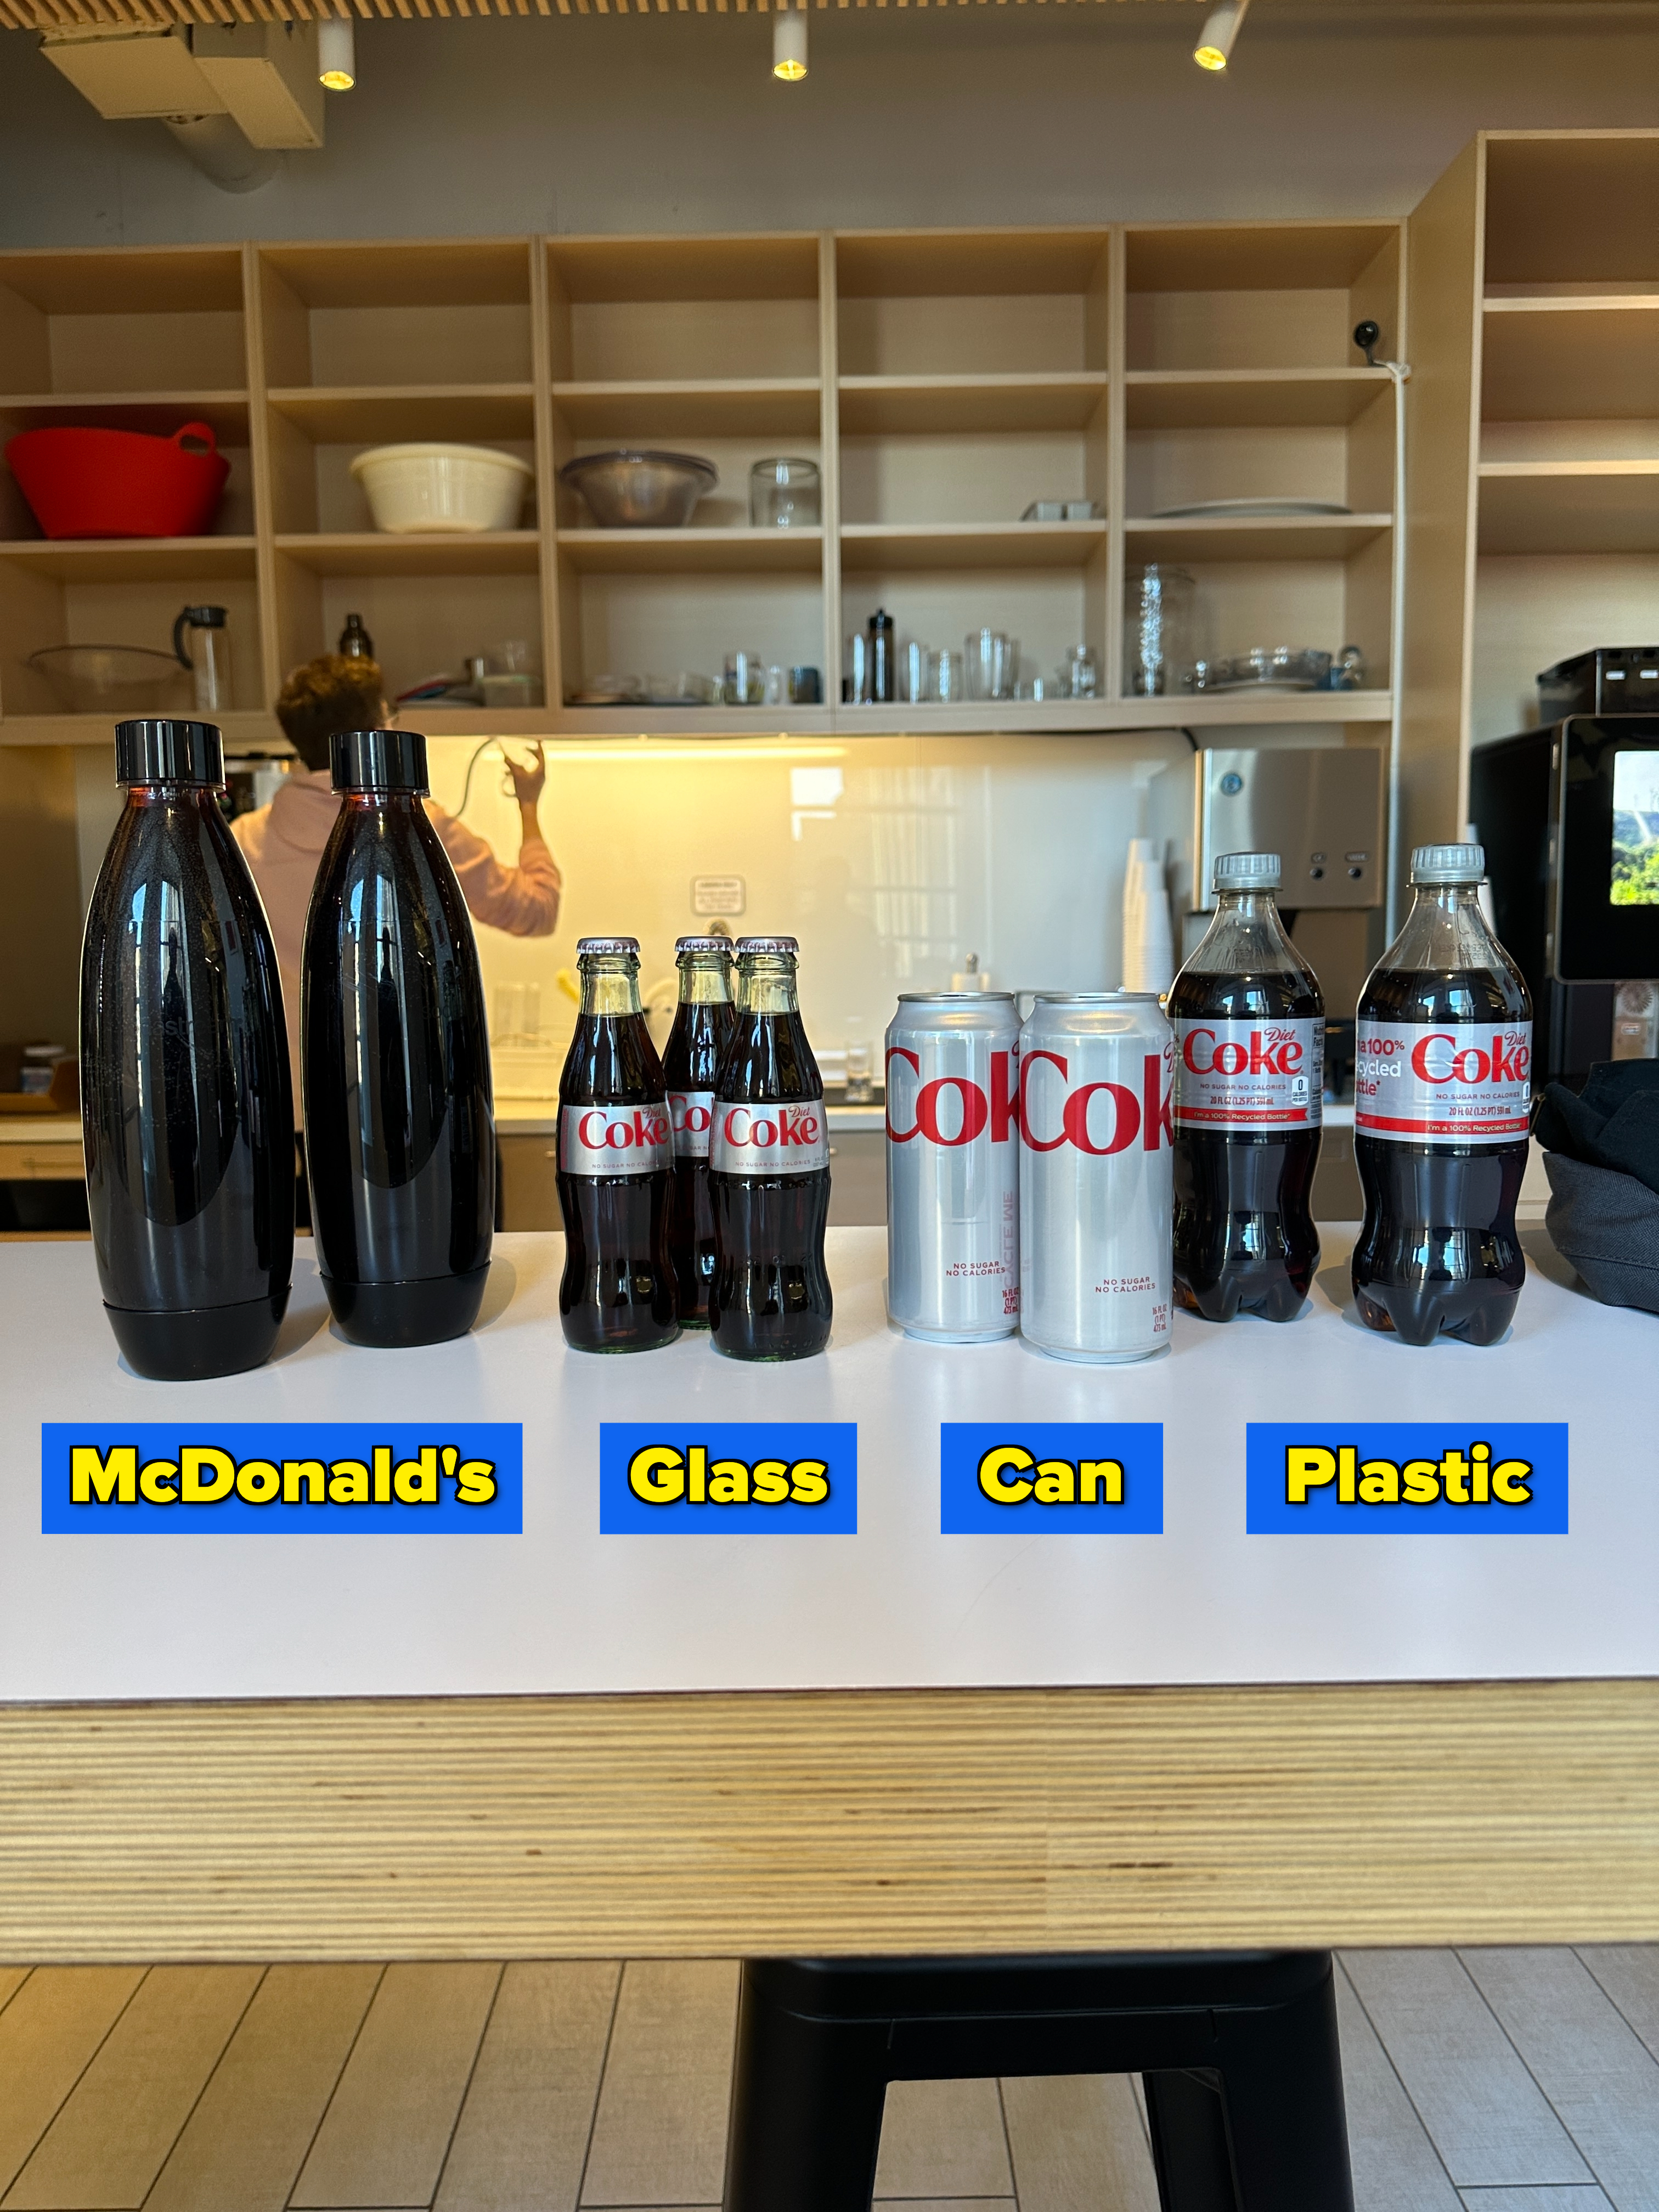 The four different types of diet coke lined up on a table